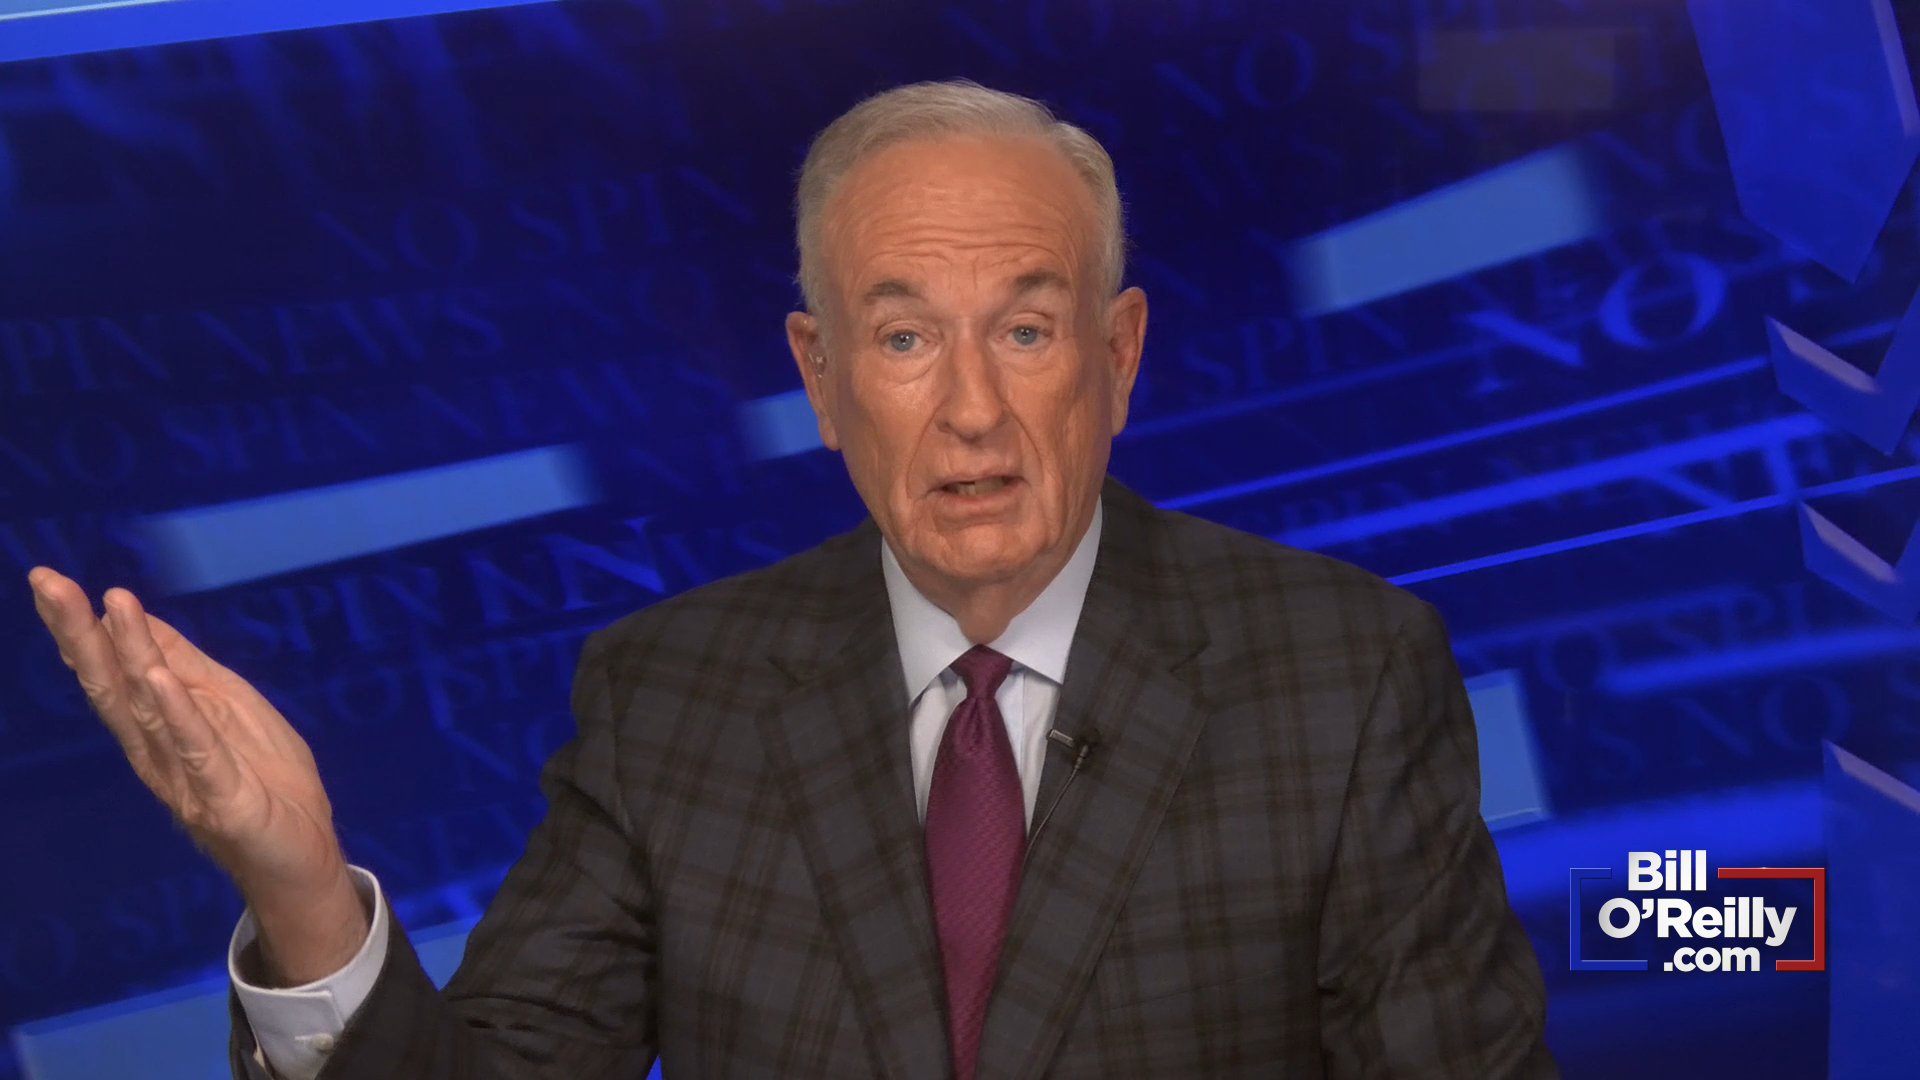 O'Reilly: 'Due Process in America Does Not Exist'